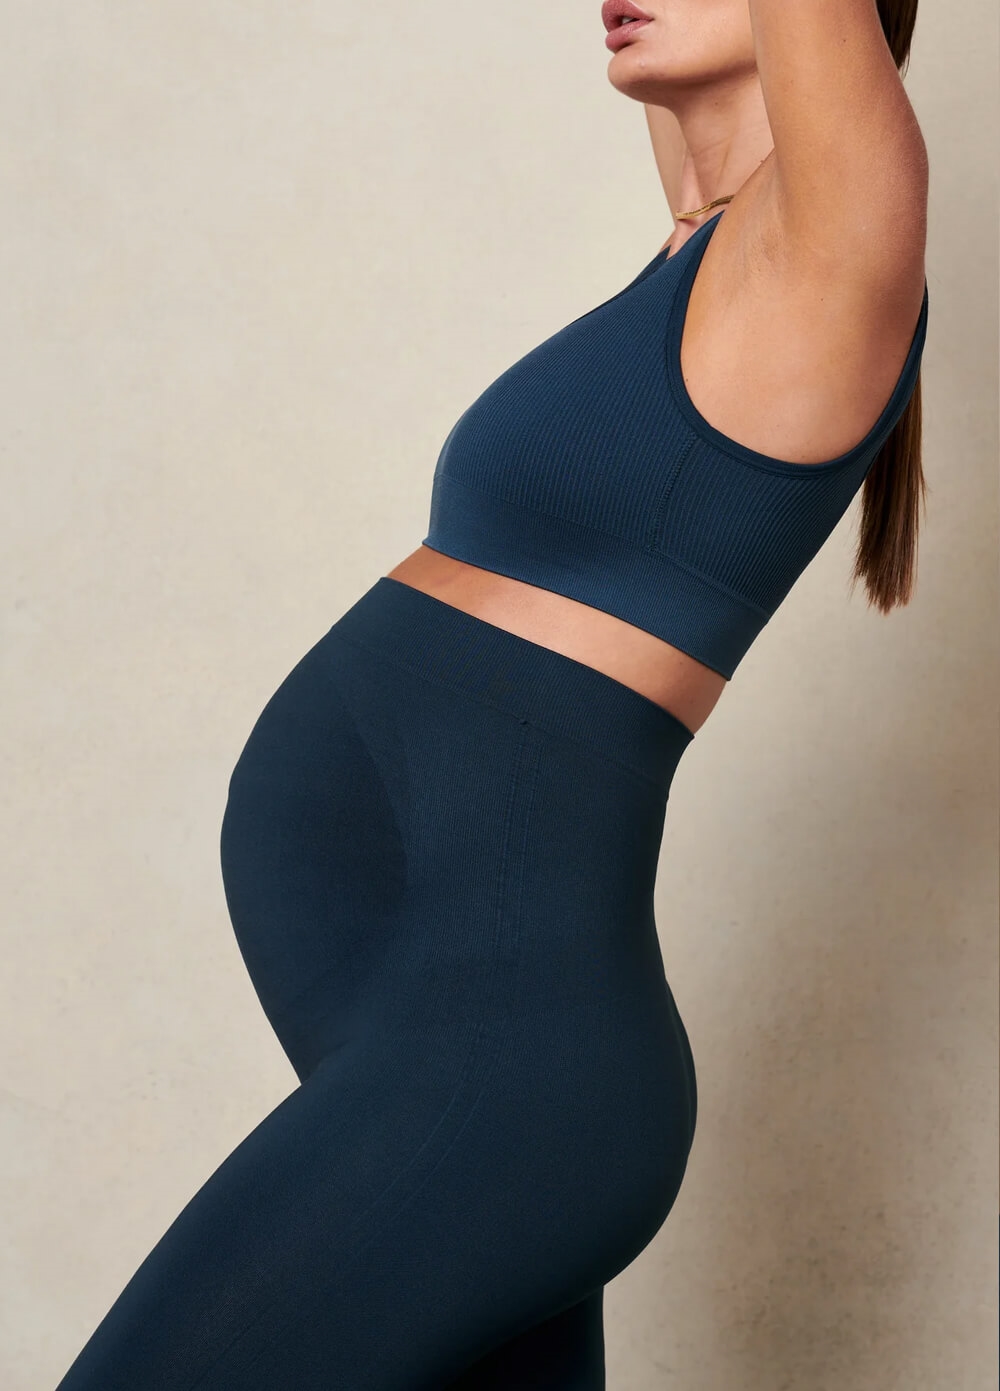 Blanqi - High Performance Belly Lift & Support Leggings in Storm